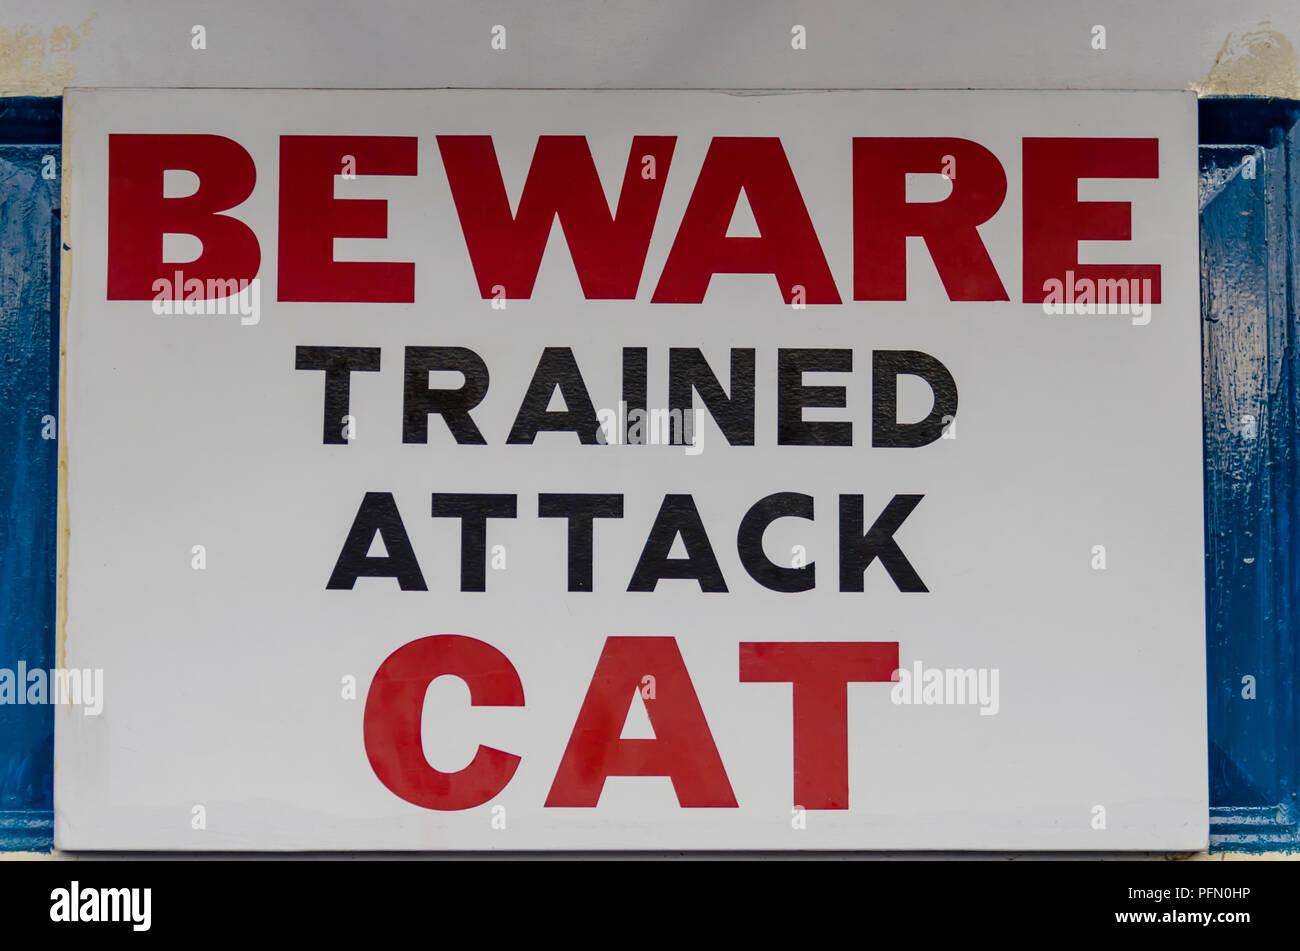 billboard warning, on the old door. Red and black letters on a white background. Carefully trained for attack cat. Stock Photo